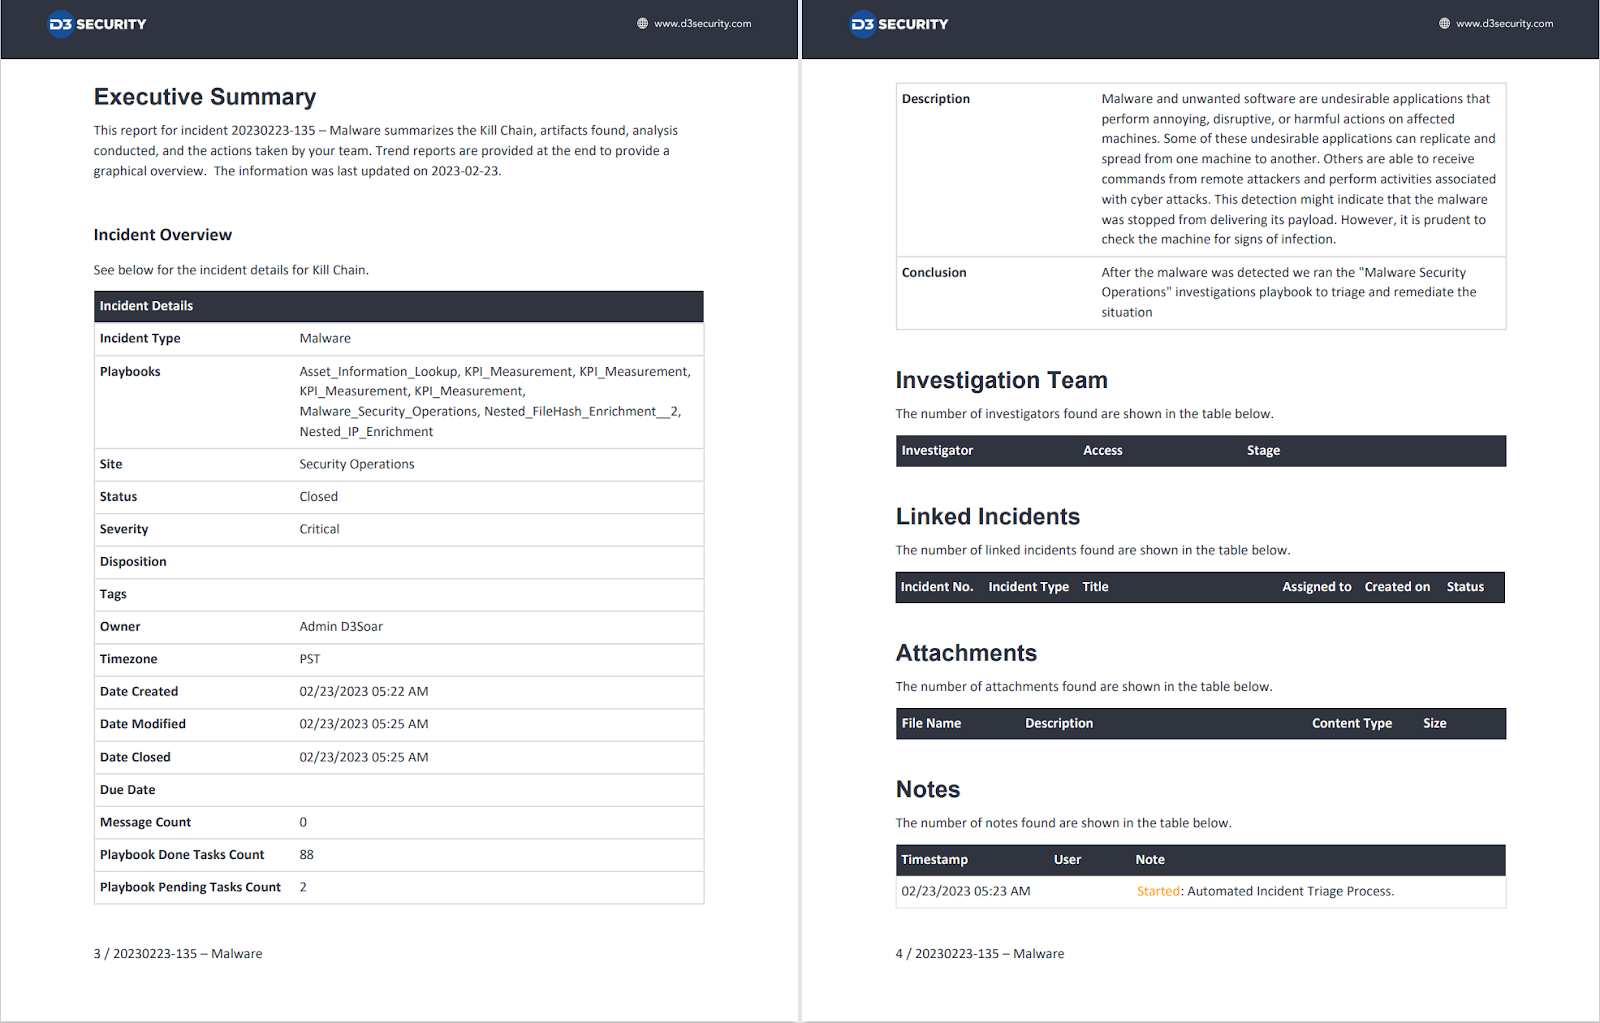 Auto-generated custom incident reports from D3 Smart SOAR